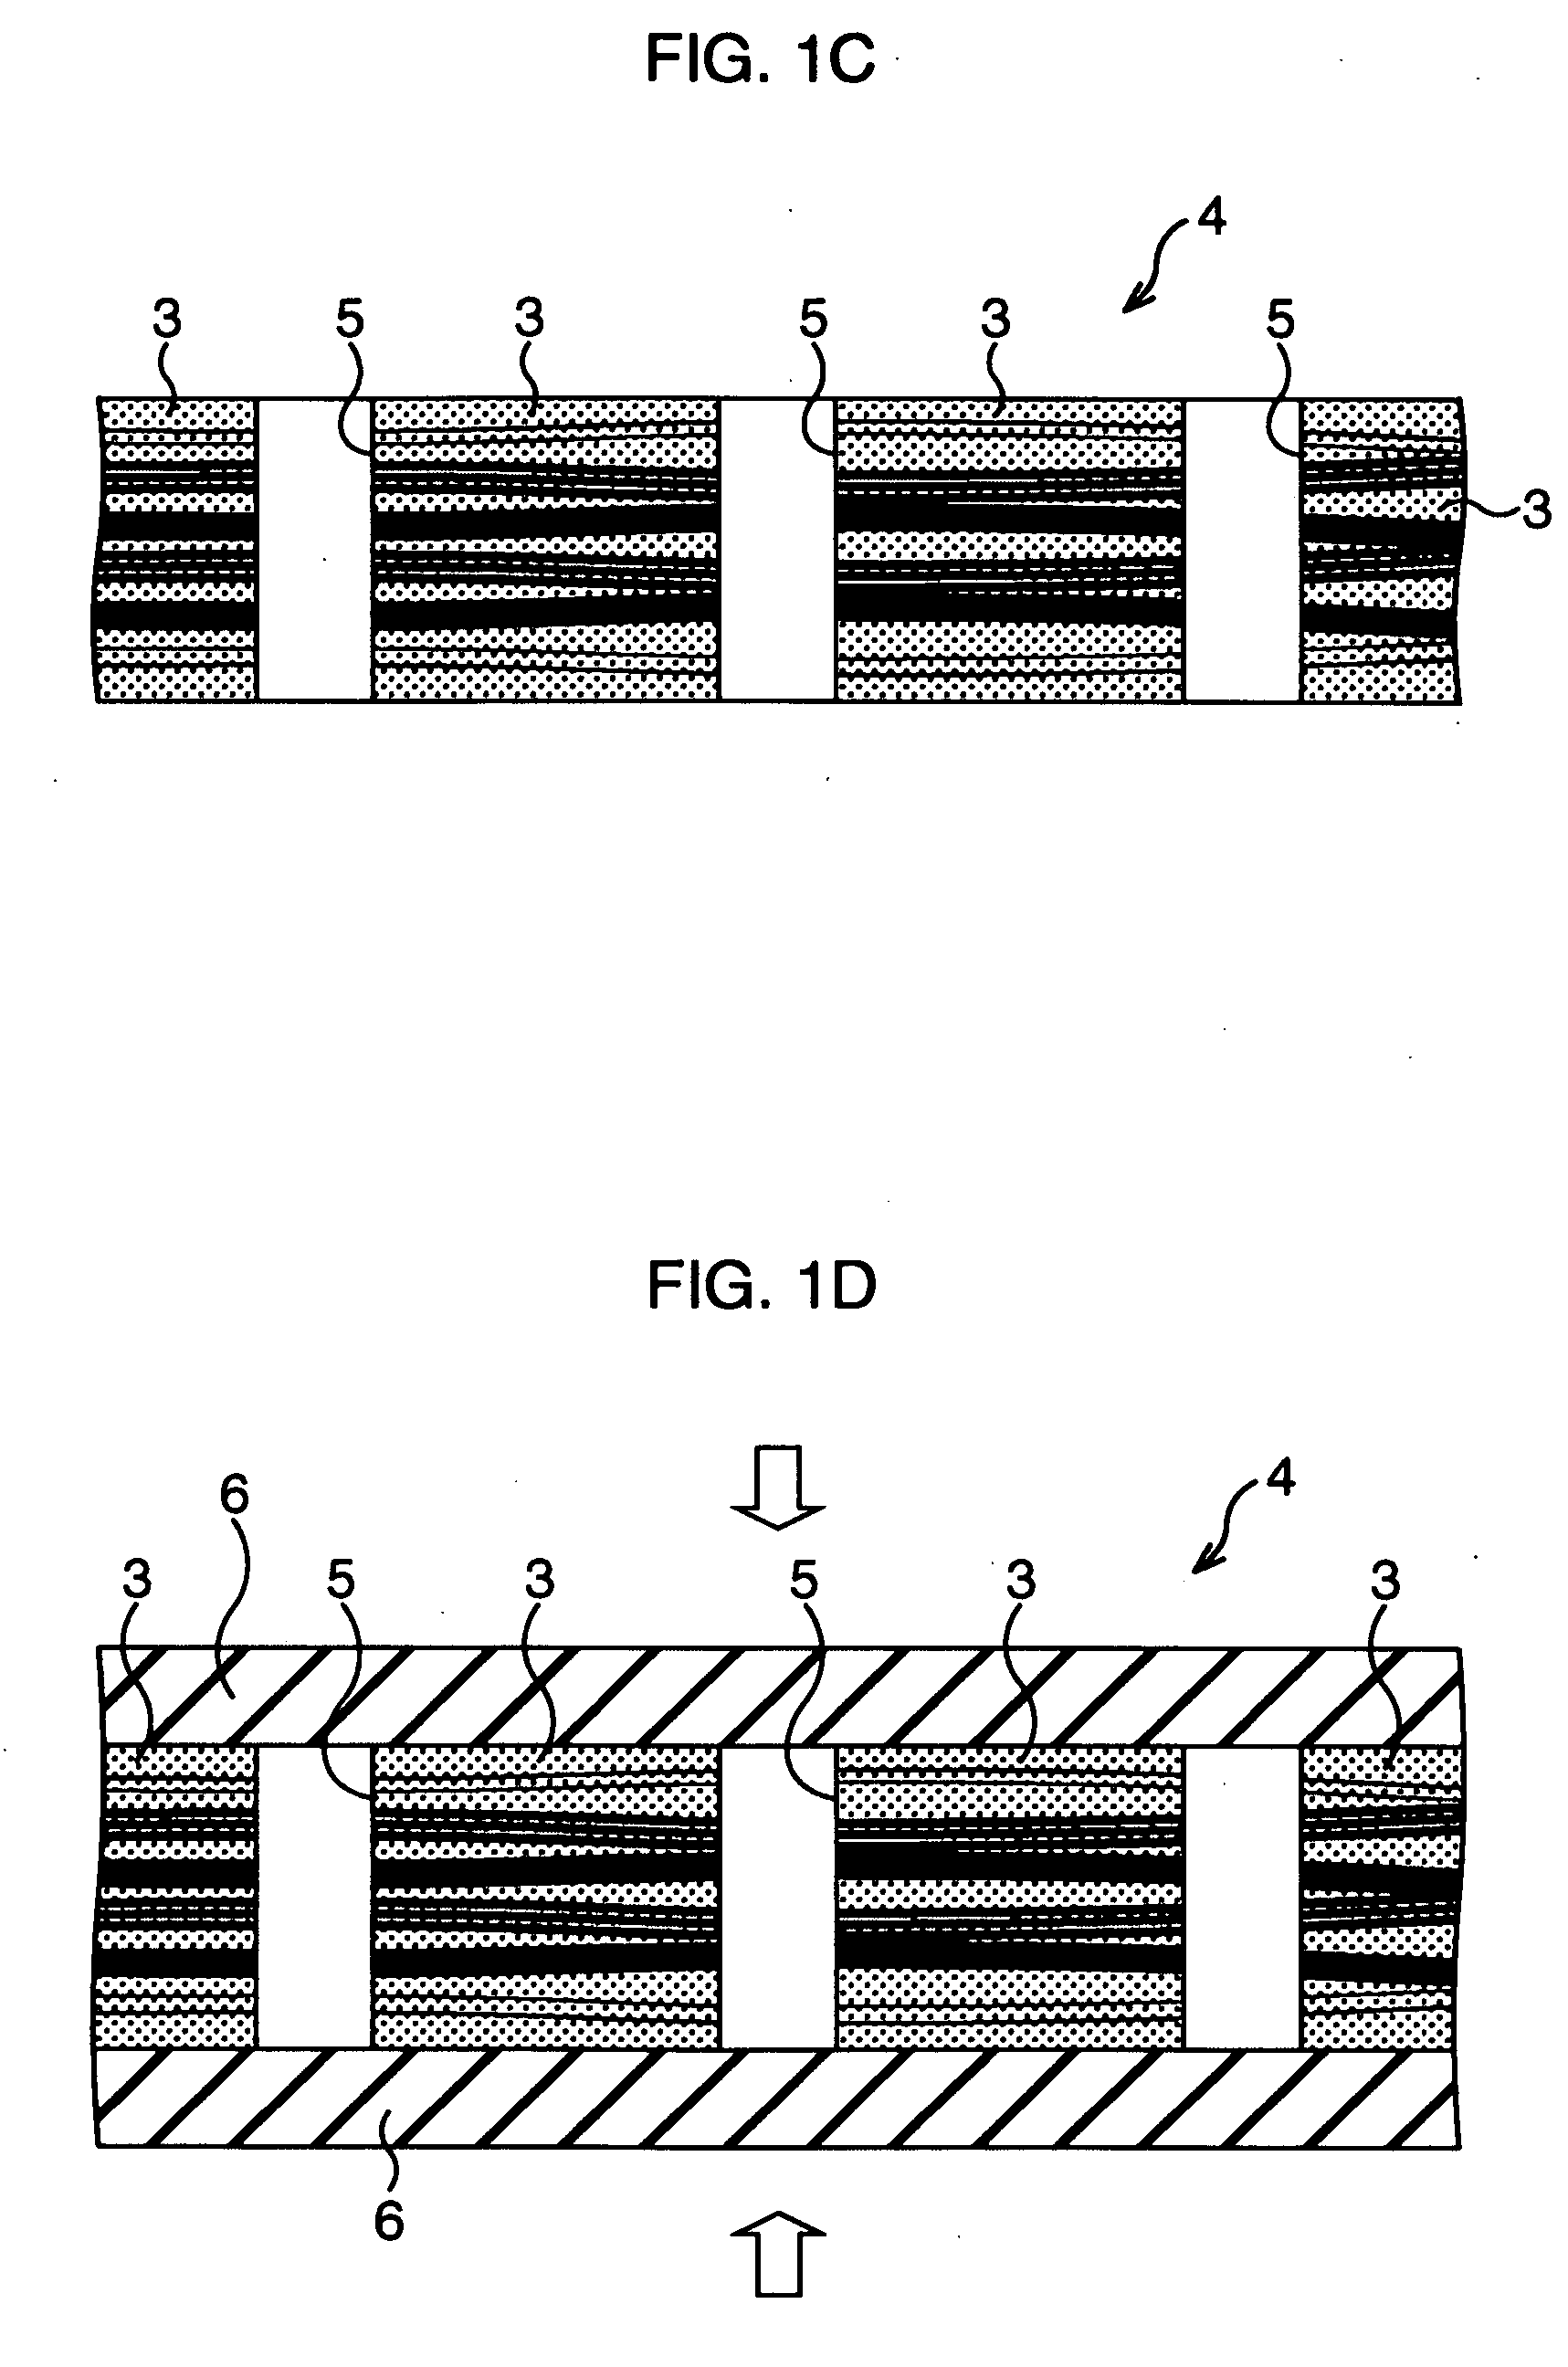 Multilevel interconnection board and method of fabricating the same